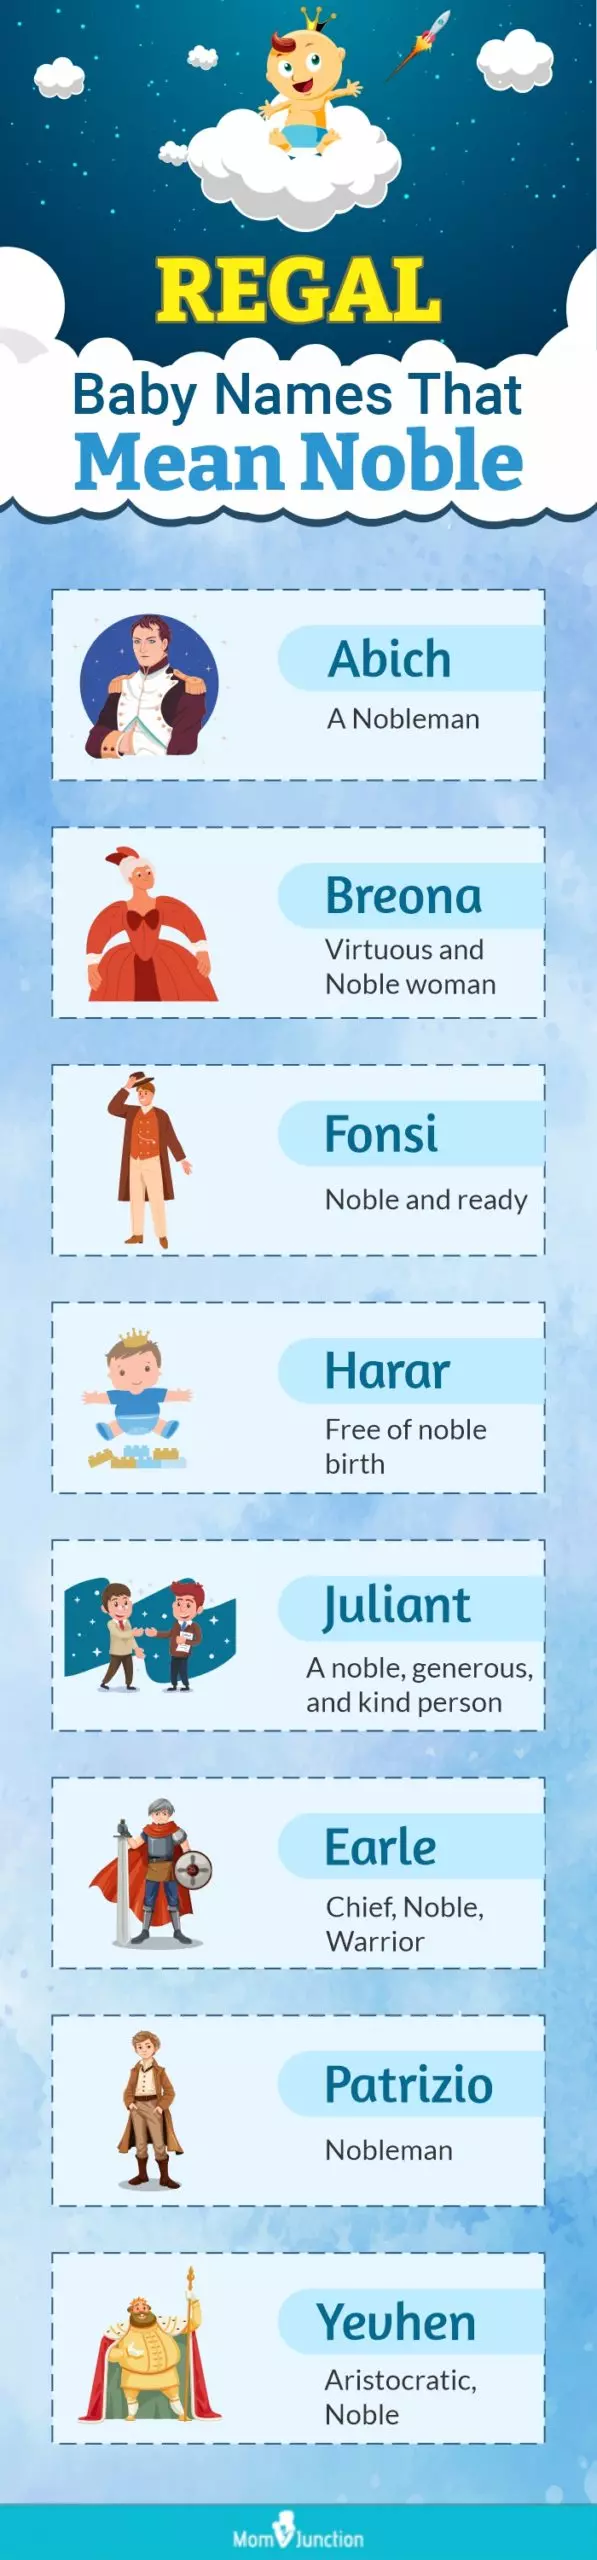 regal baby names that mean noble (infographic)